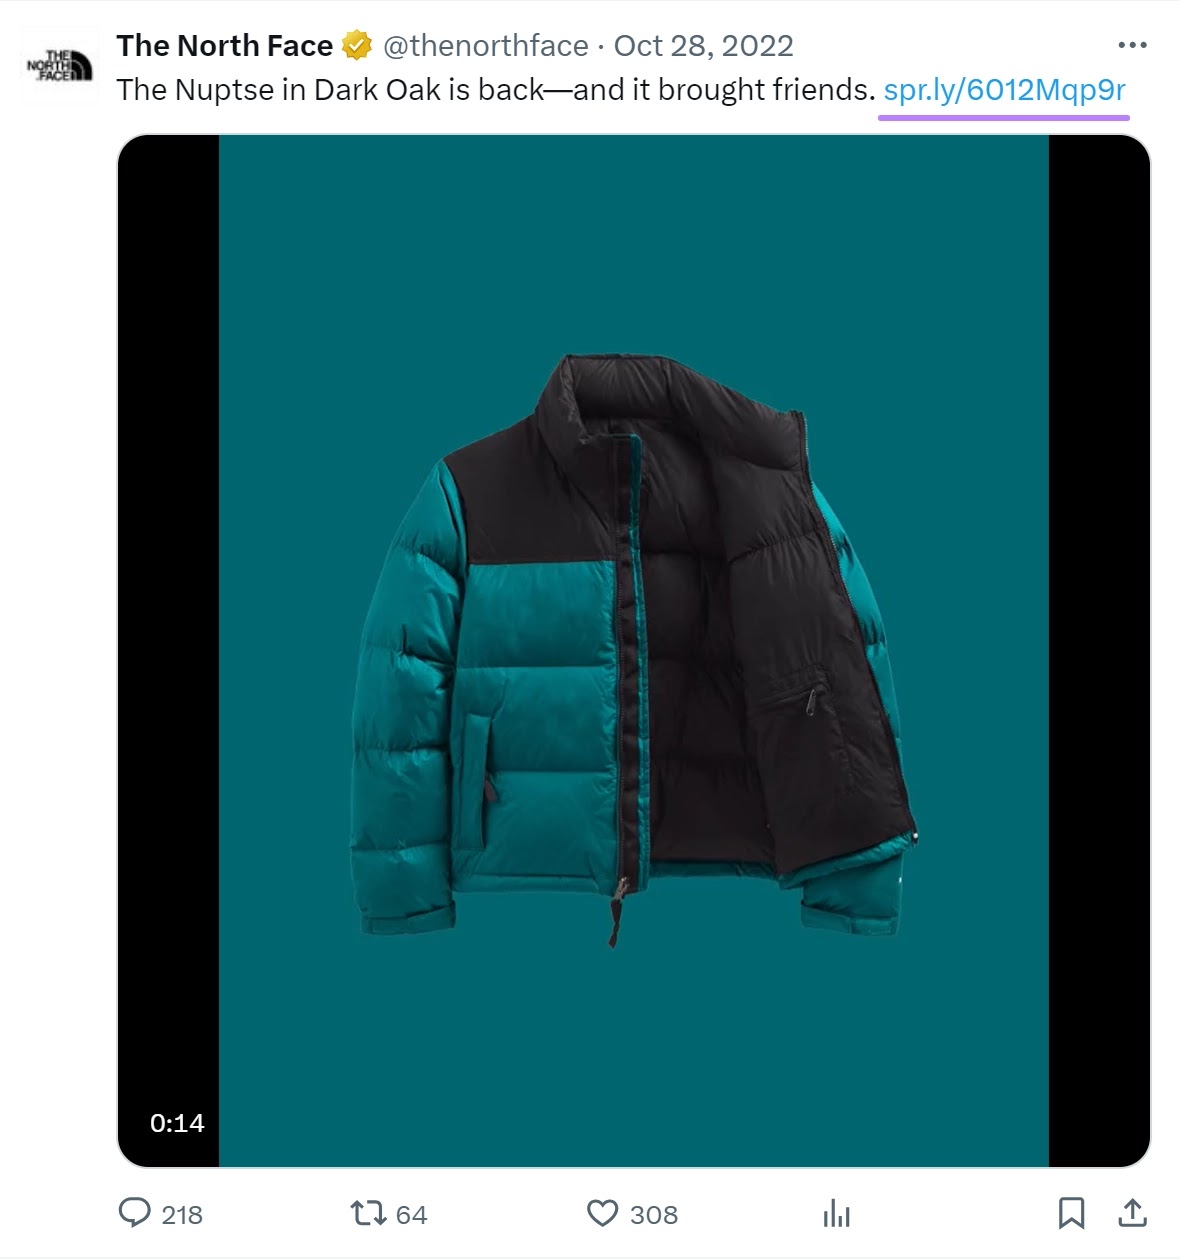 Social media post from The North Face with a link to one of their products.